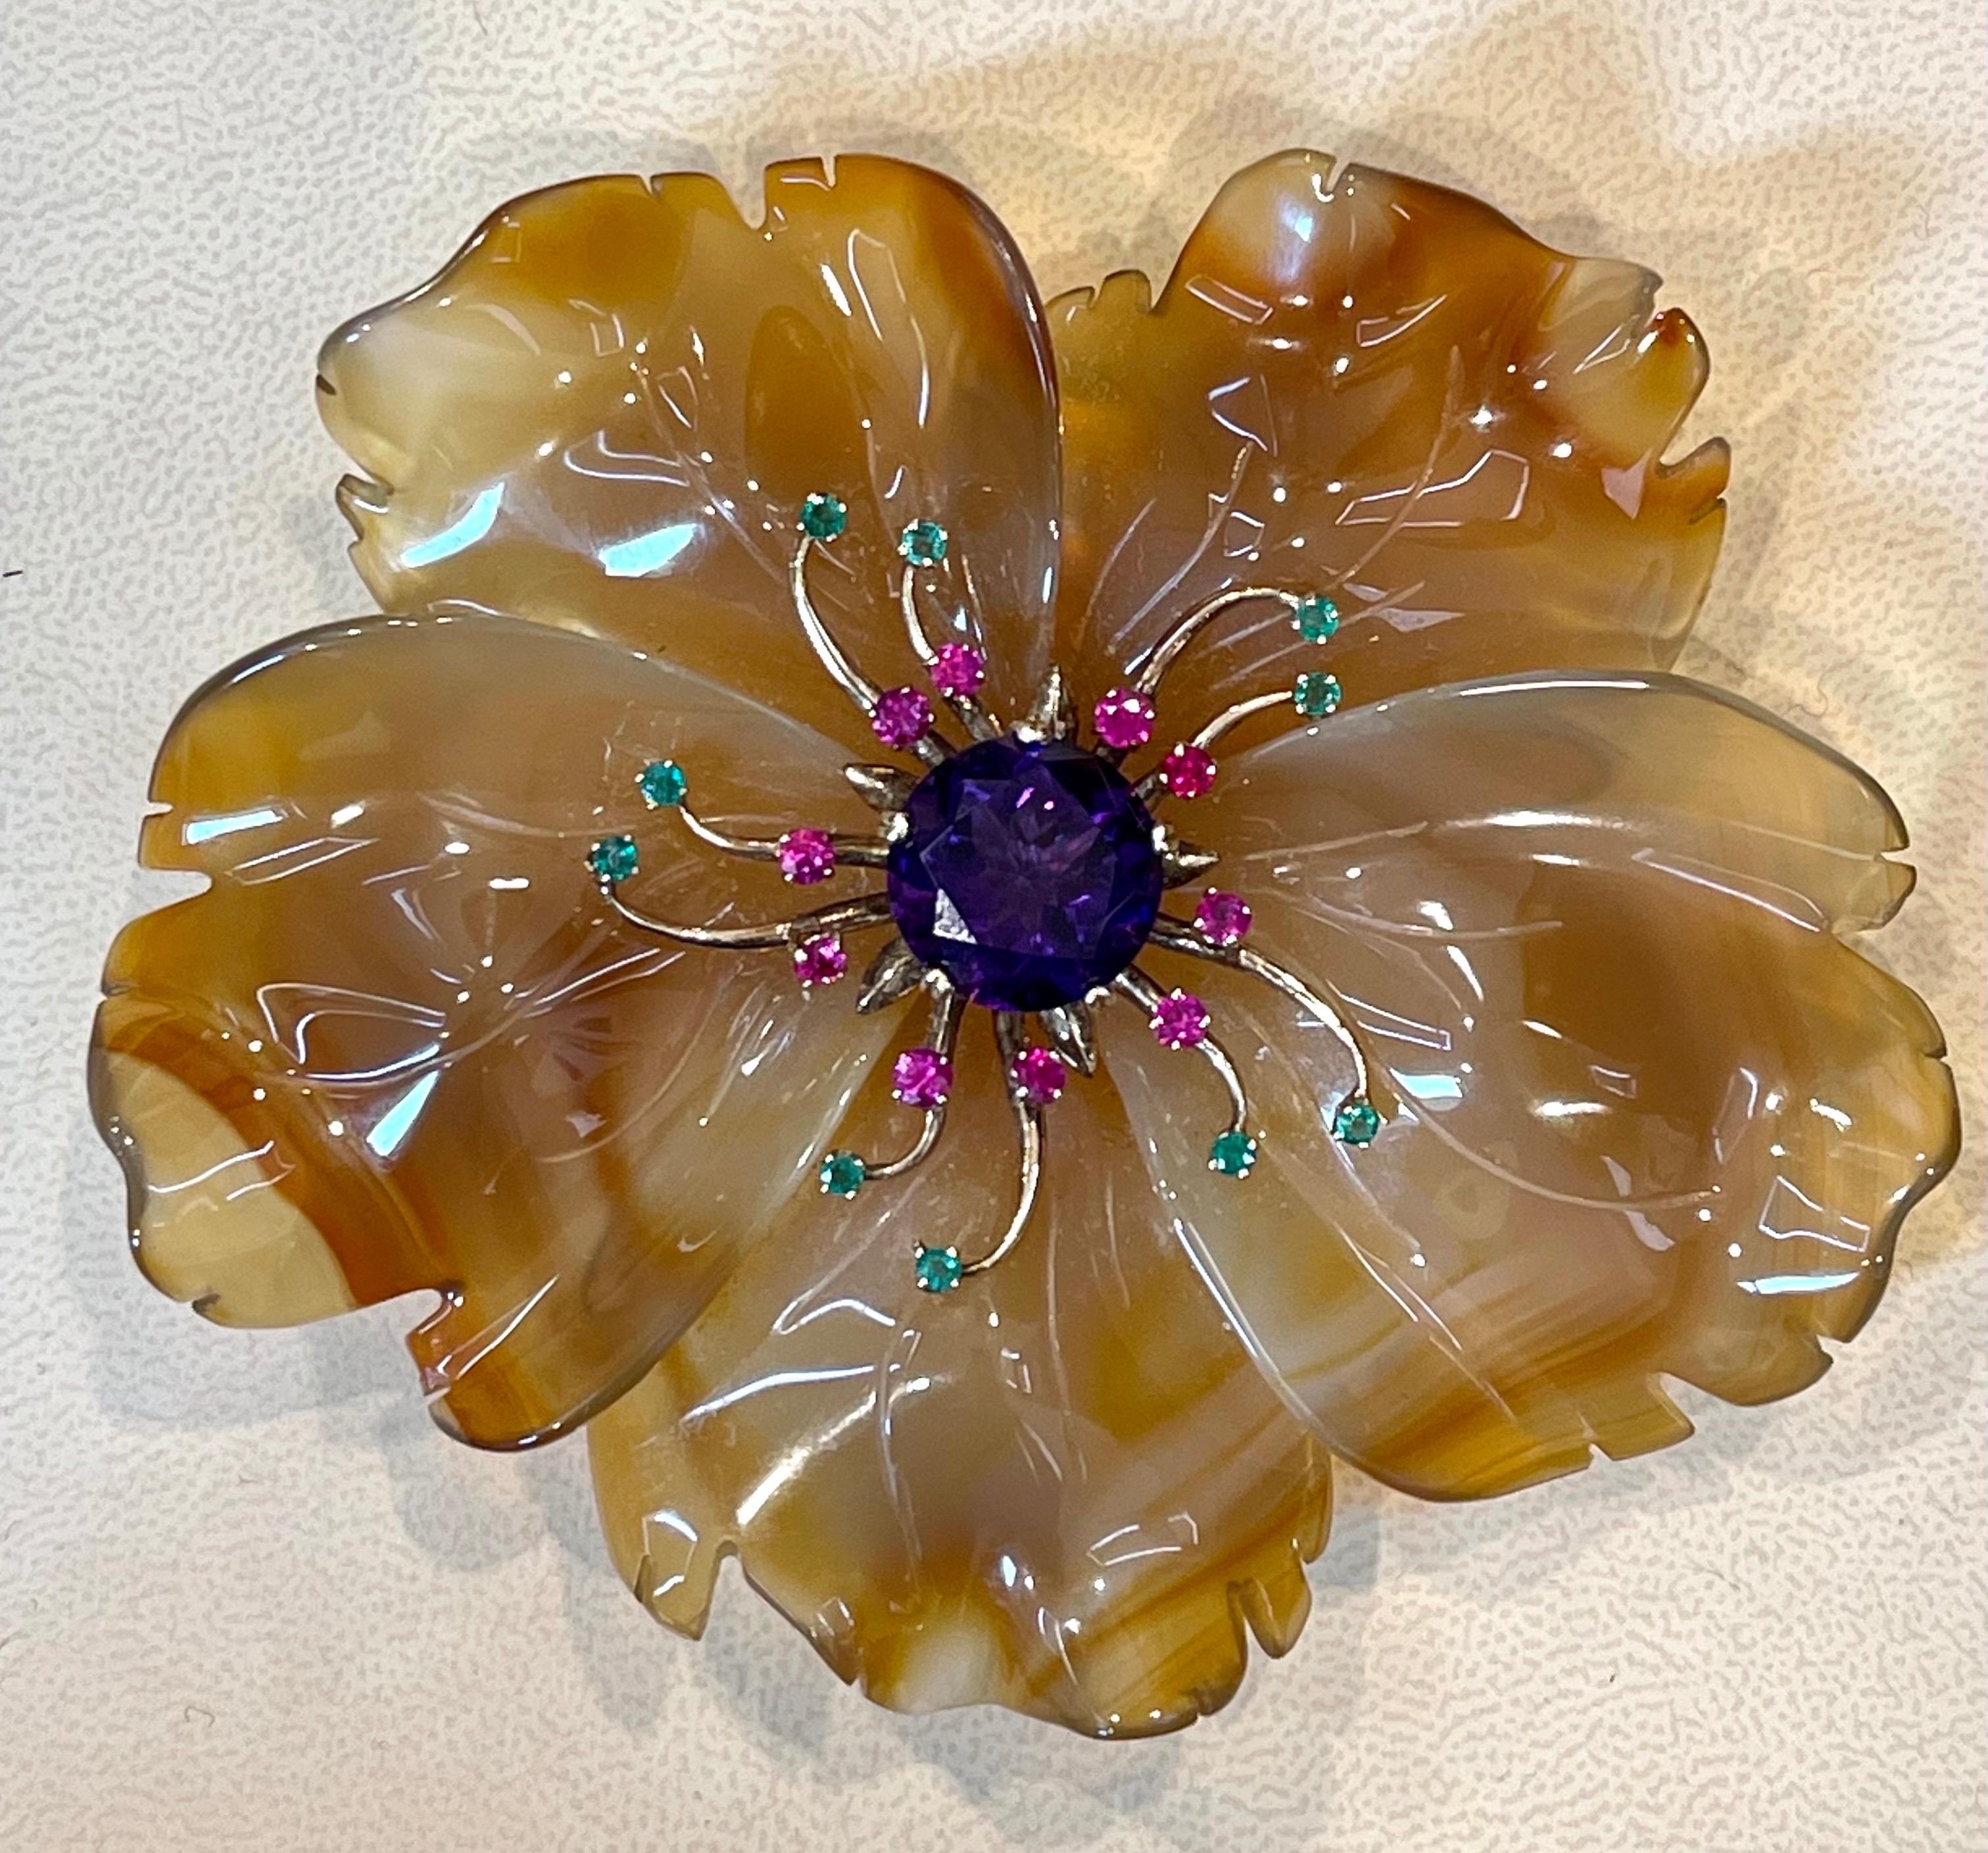 400 Carat Natural Agate, Amethyst, Ruby  and Emerald Big Flower Pin 14K Gold, Estate yellow Gold 
This spectacular Pin consisting of a 5 leaves of agate
In the center , there is a round natural Amethyst approximately 10 ct with some rubies and